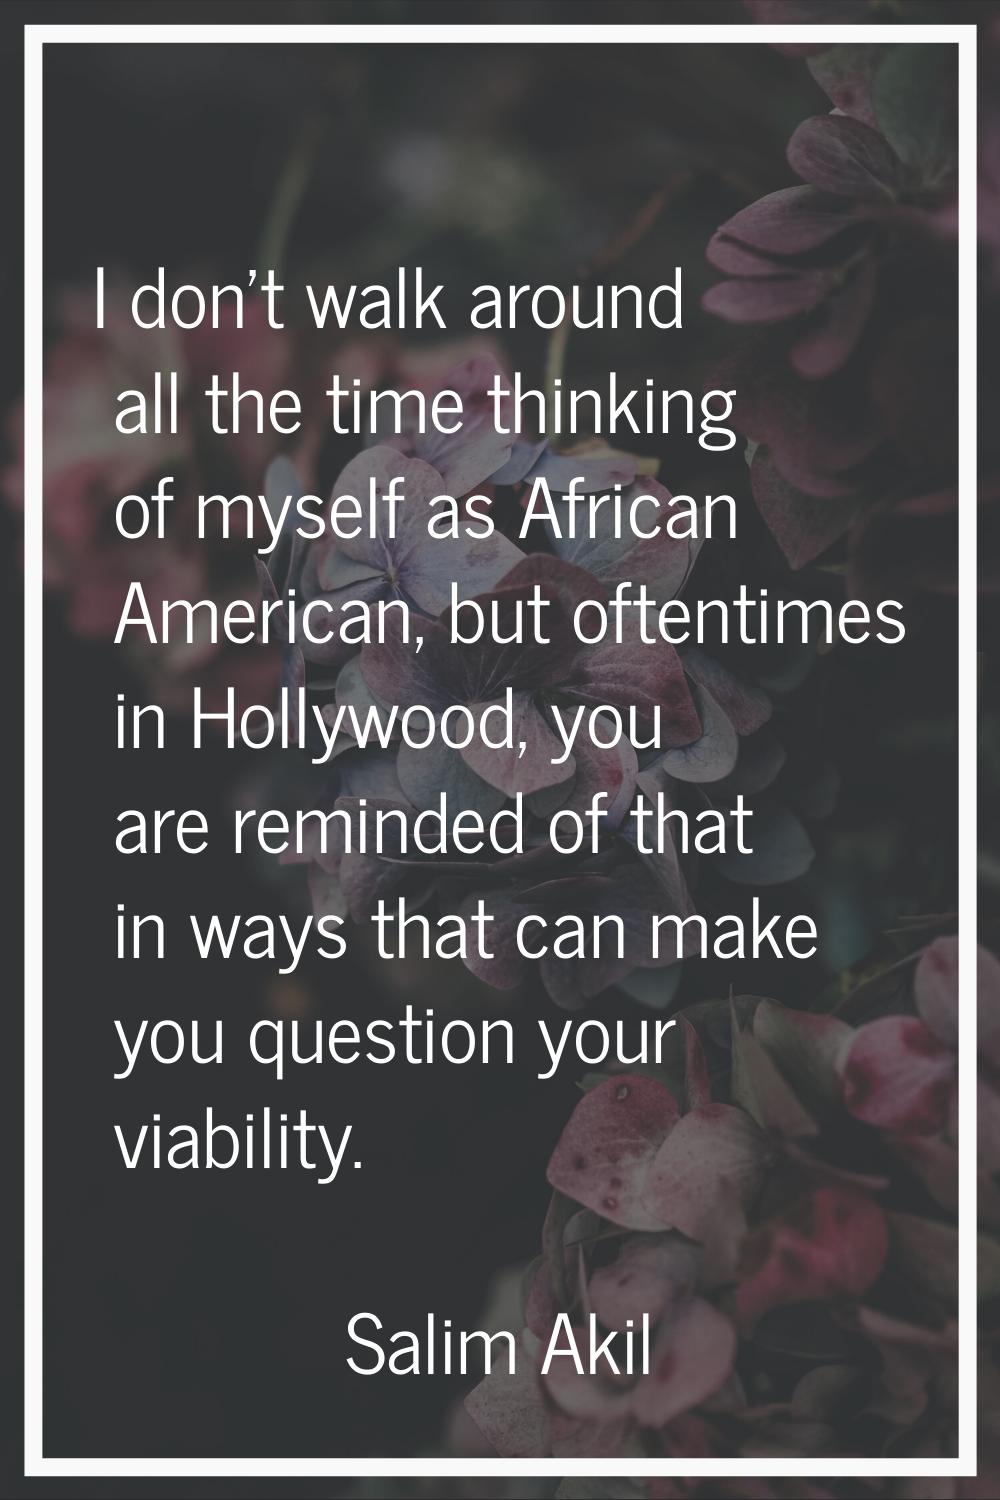 I don't walk around all the time thinking of myself as African American, but oftentimes in Hollywoo